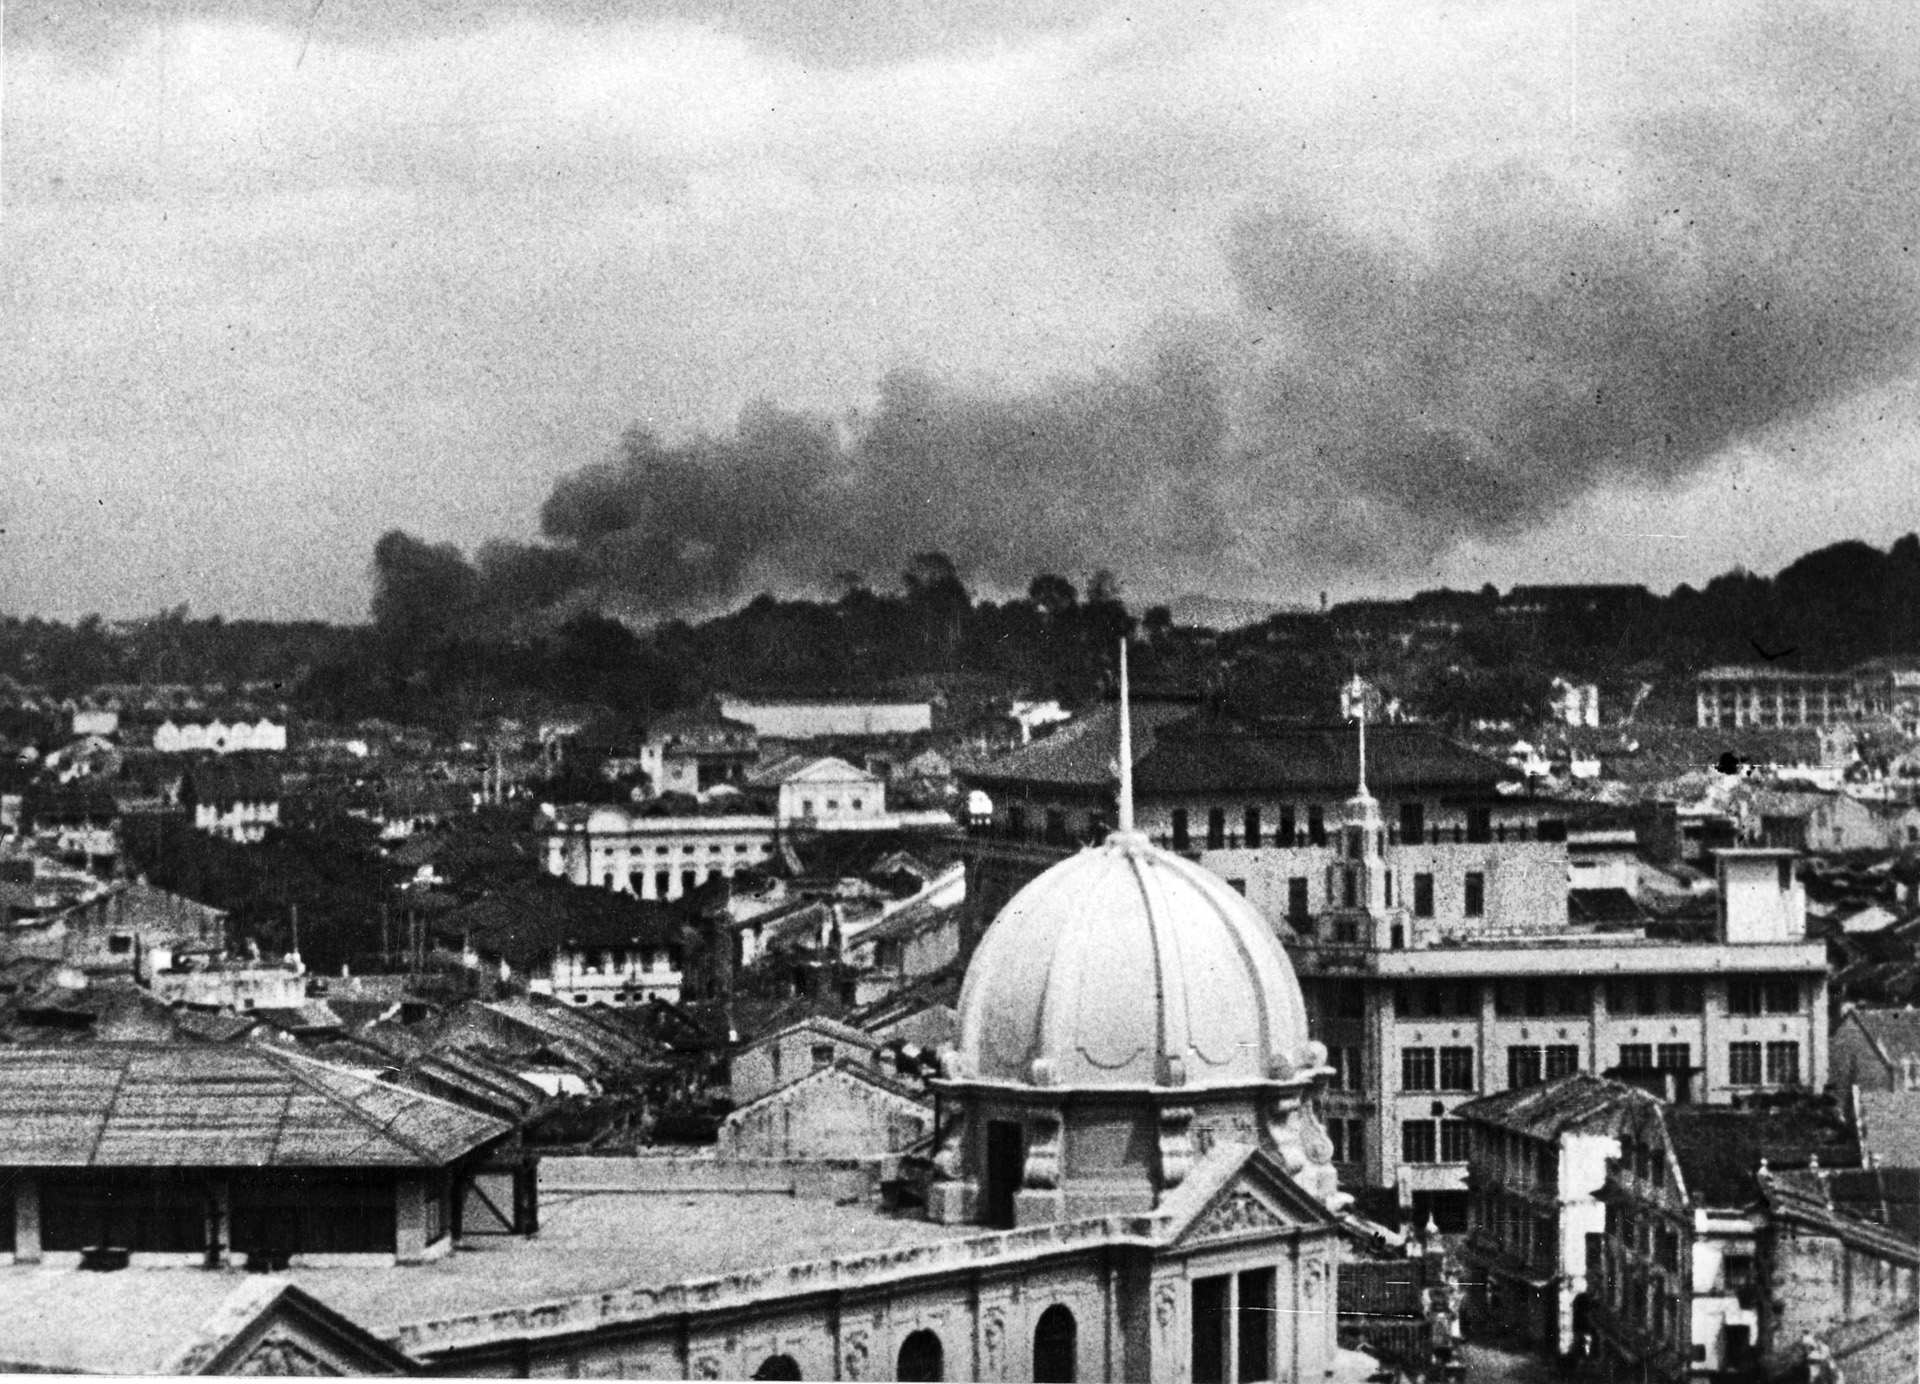 Smoke billows from an area of Singapore following a Japanese air raid in early 1942. The advancing Japanese moved swiftly down the Malay Peninsula and captured Singapore in an impressive feat of arms.